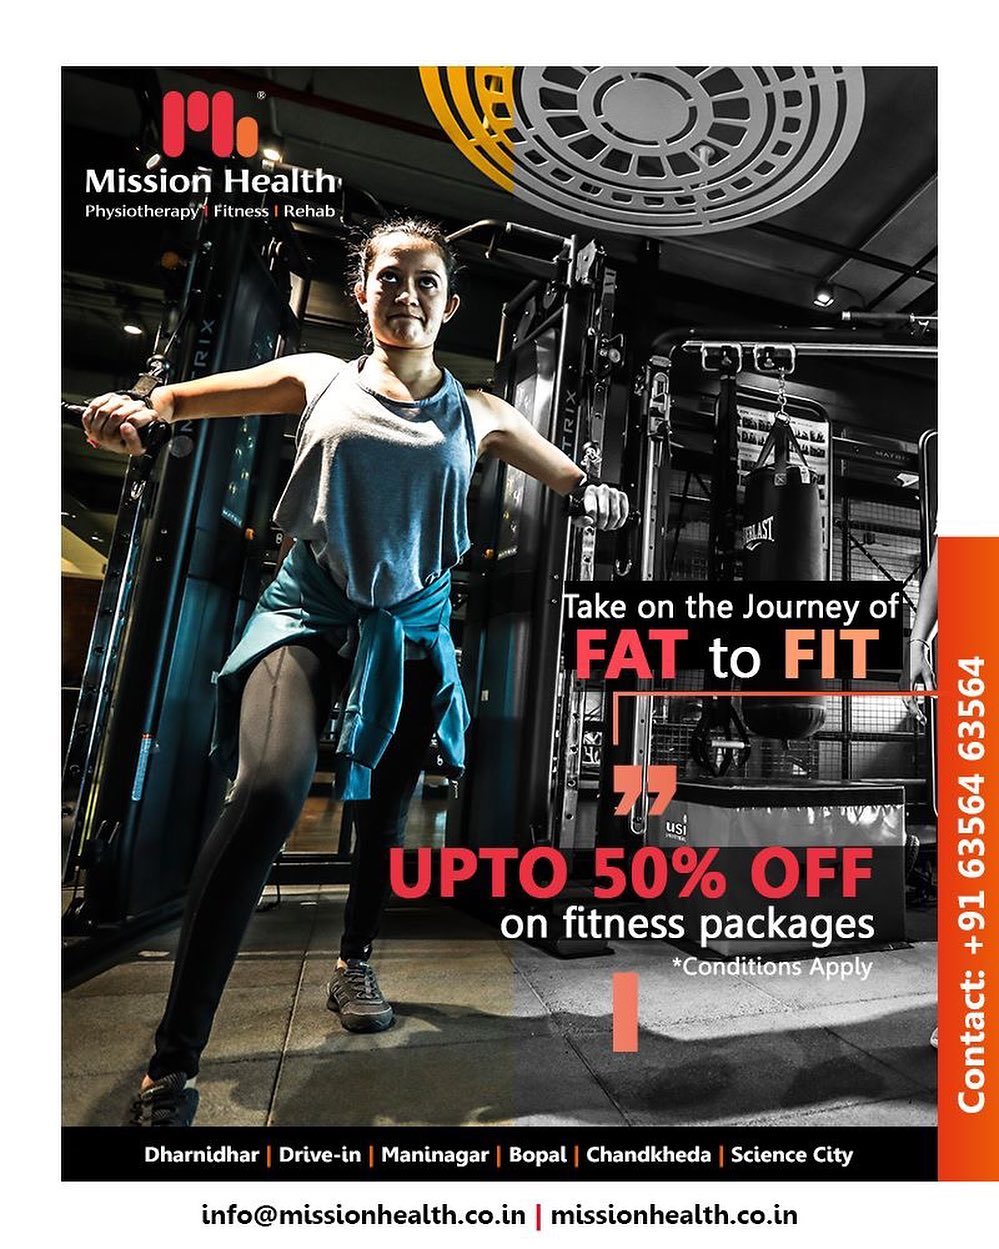 Take on a journey towards becoming the fitter you this June! Avail exclusive fitness offers all through the month!

#MissionHealth #MissionHealthIndia #Fitness #Physiotherapy  #Rehab